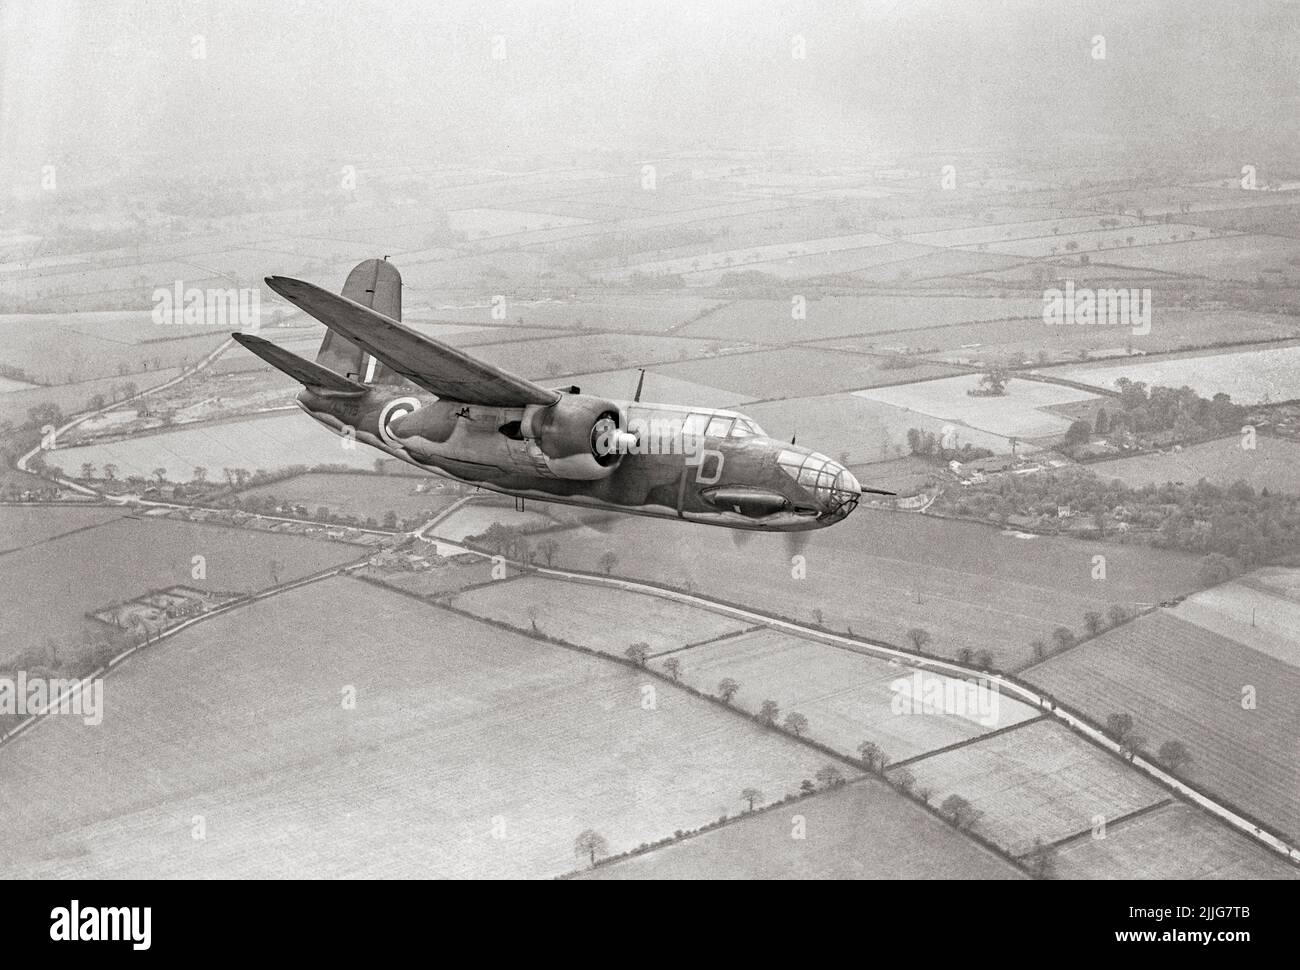 A Boston Mark III, of No. 88 Squadron RAF based at Attlebridge, Norfolk, in flight. It was an American medium bomber, attack aircraft, night intruder, night fighter, and reconnaissance aircraft of World War II. Stock Photo